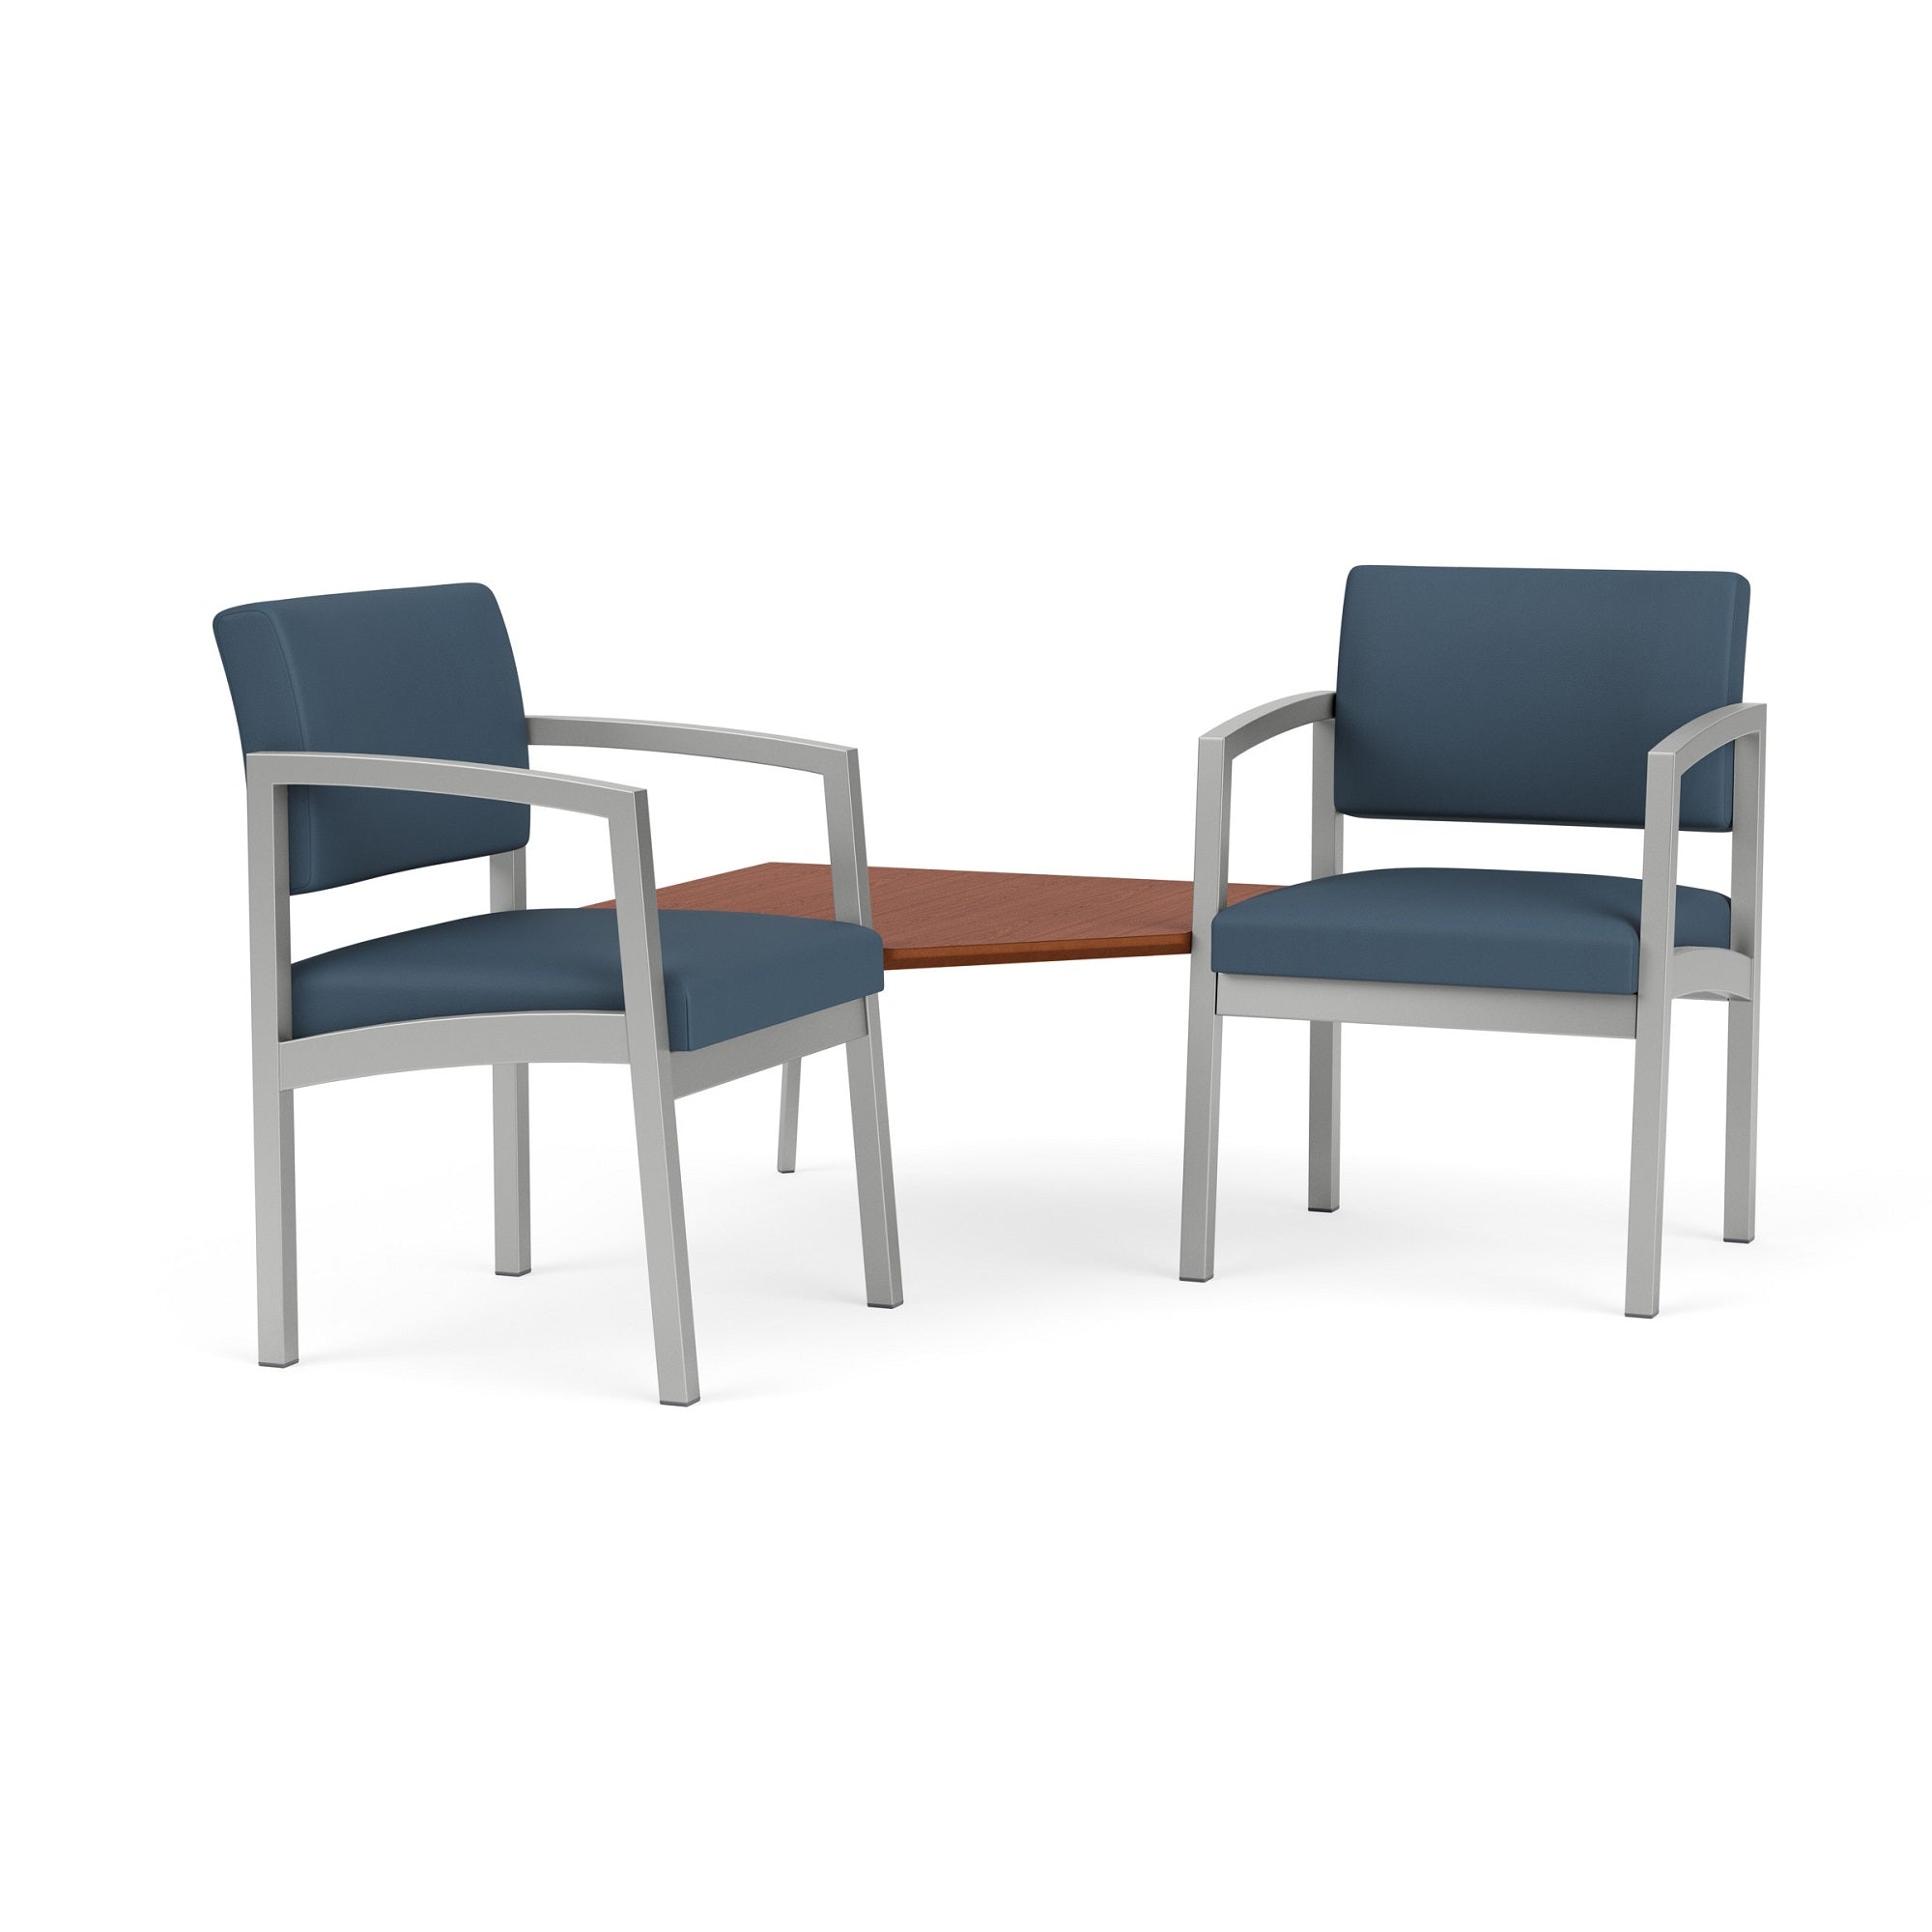 Lenox Steel Collection Reception Seating, 2 Chairs with Connecting Corner Table, Standard Fabric Upholstery, FREE SHIPPING